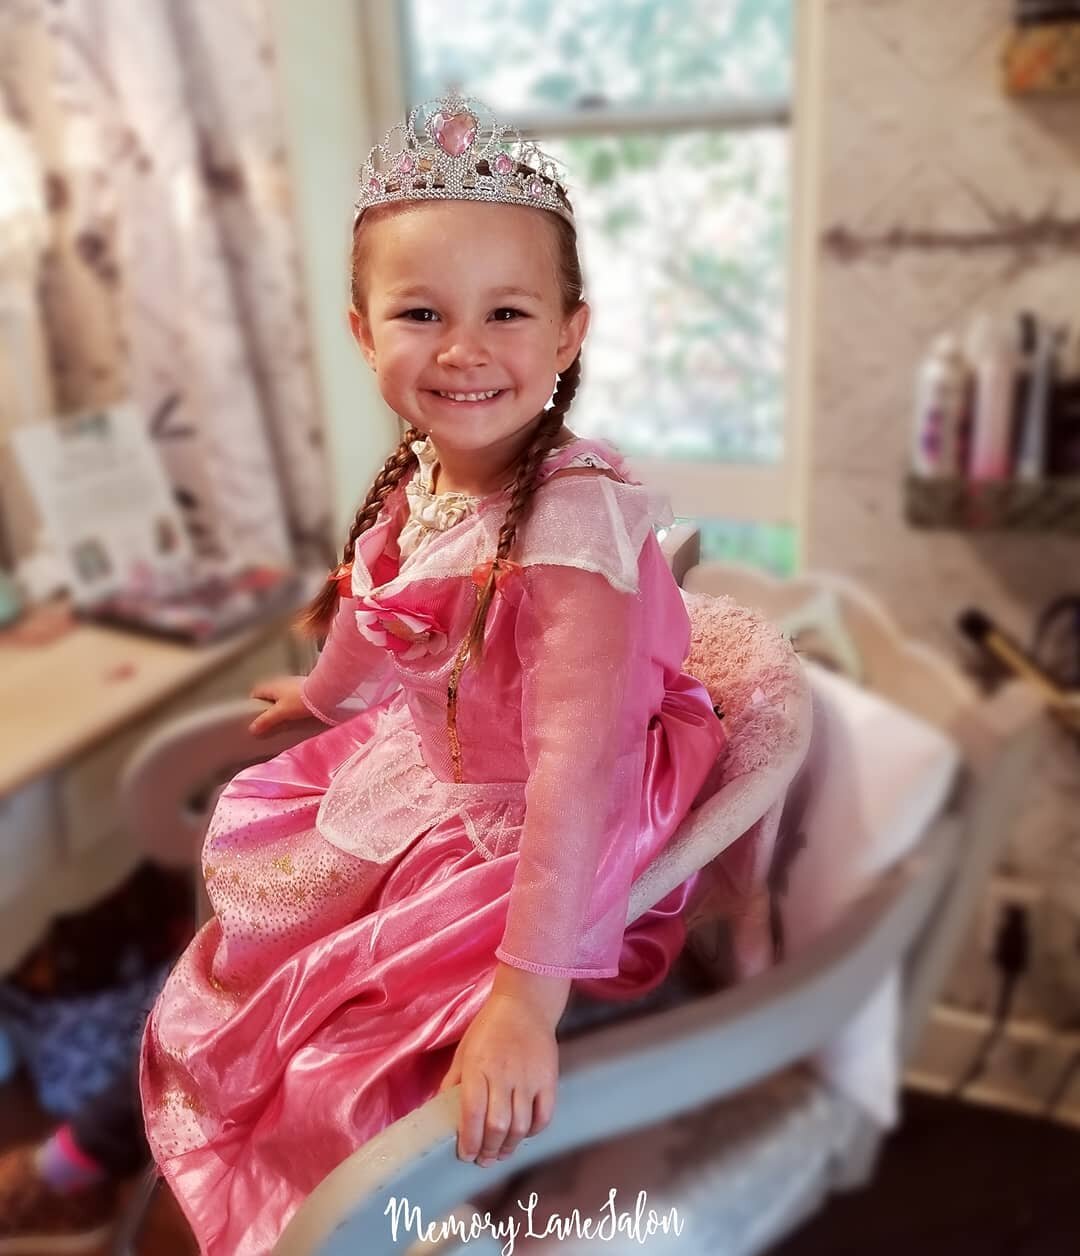 Gotta love when your first client of the morning is #sleepingbeauty!👸🏼
Princess hair exclusively at Memory Lane Salon!💖
#princessparty #princesshair #littletonsmallbusiness